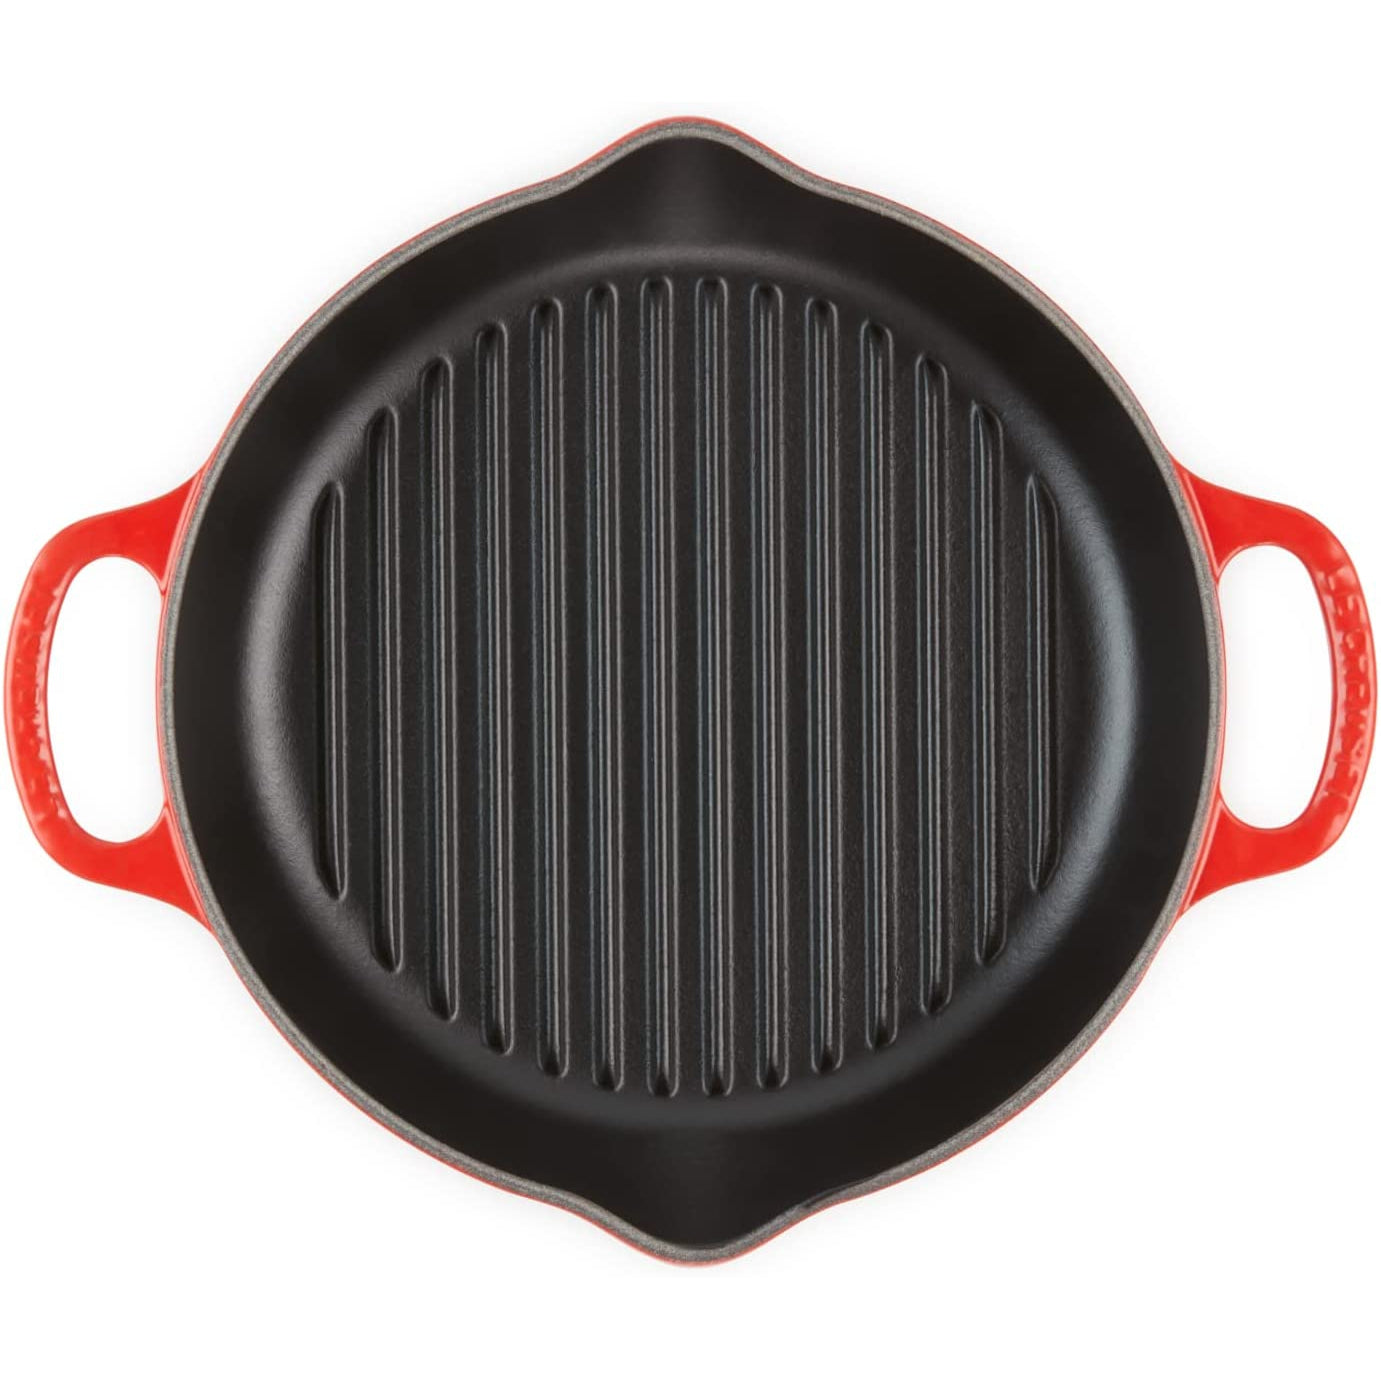 Le Creuset - 25cm Cherry Red / Cerise Deep Round Grill Top View